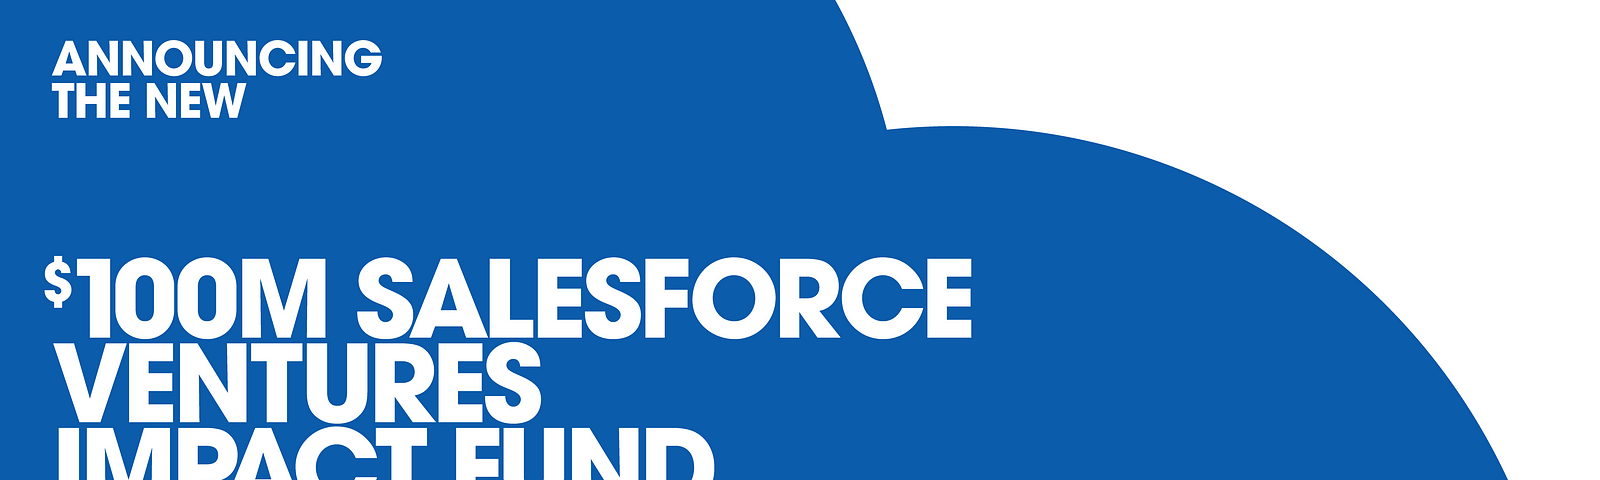 Announcing the new $100M Salesforce Ventures Impact Fund